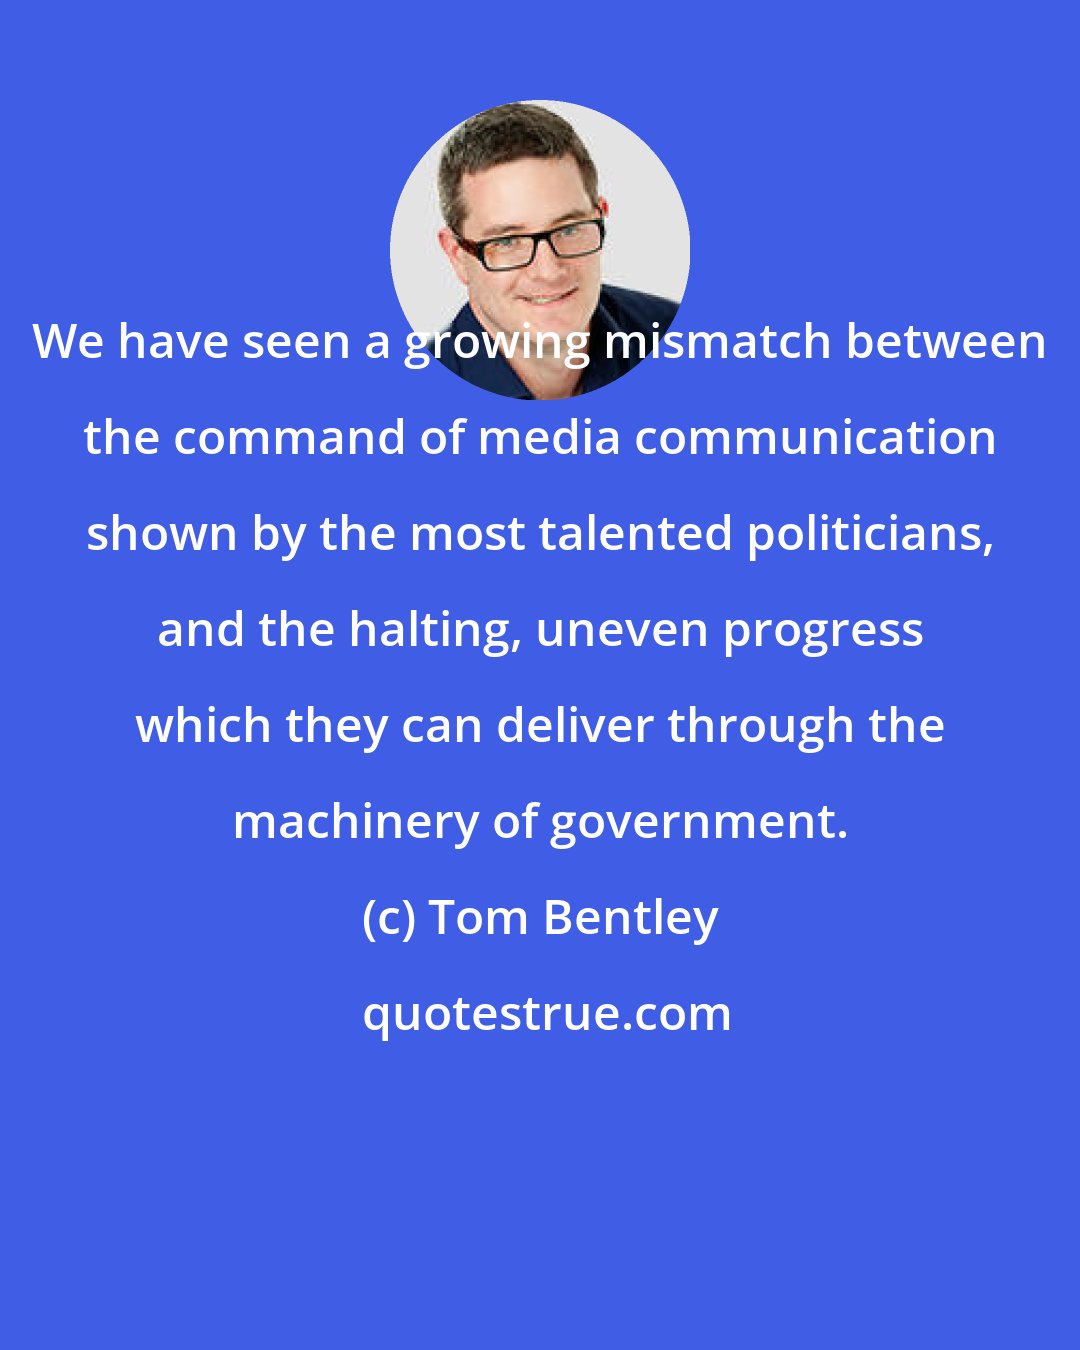 Tom Bentley: We have seen a growing mismatch between the command of media communication shown by the most talented politicians, and the halting, uneven progress which they can deliver through the machinery of government.